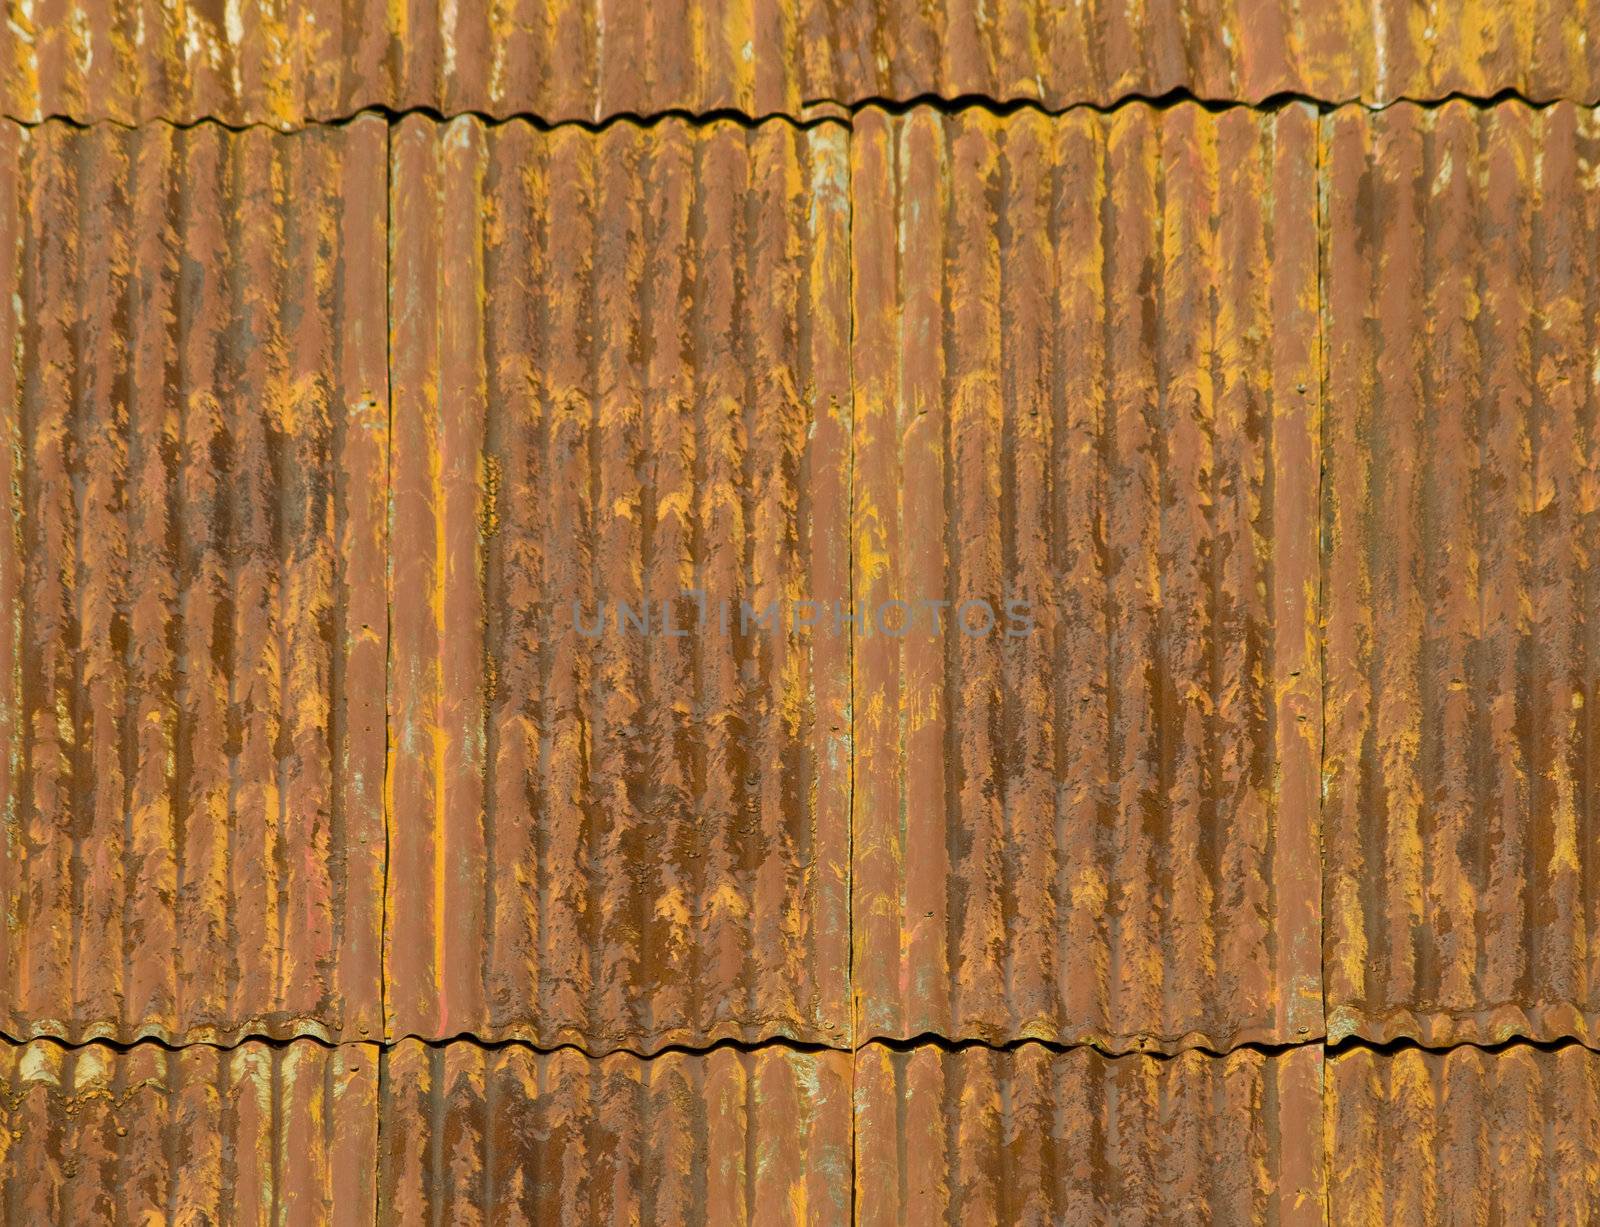 Corroded and rusty corrugated metal roof panels